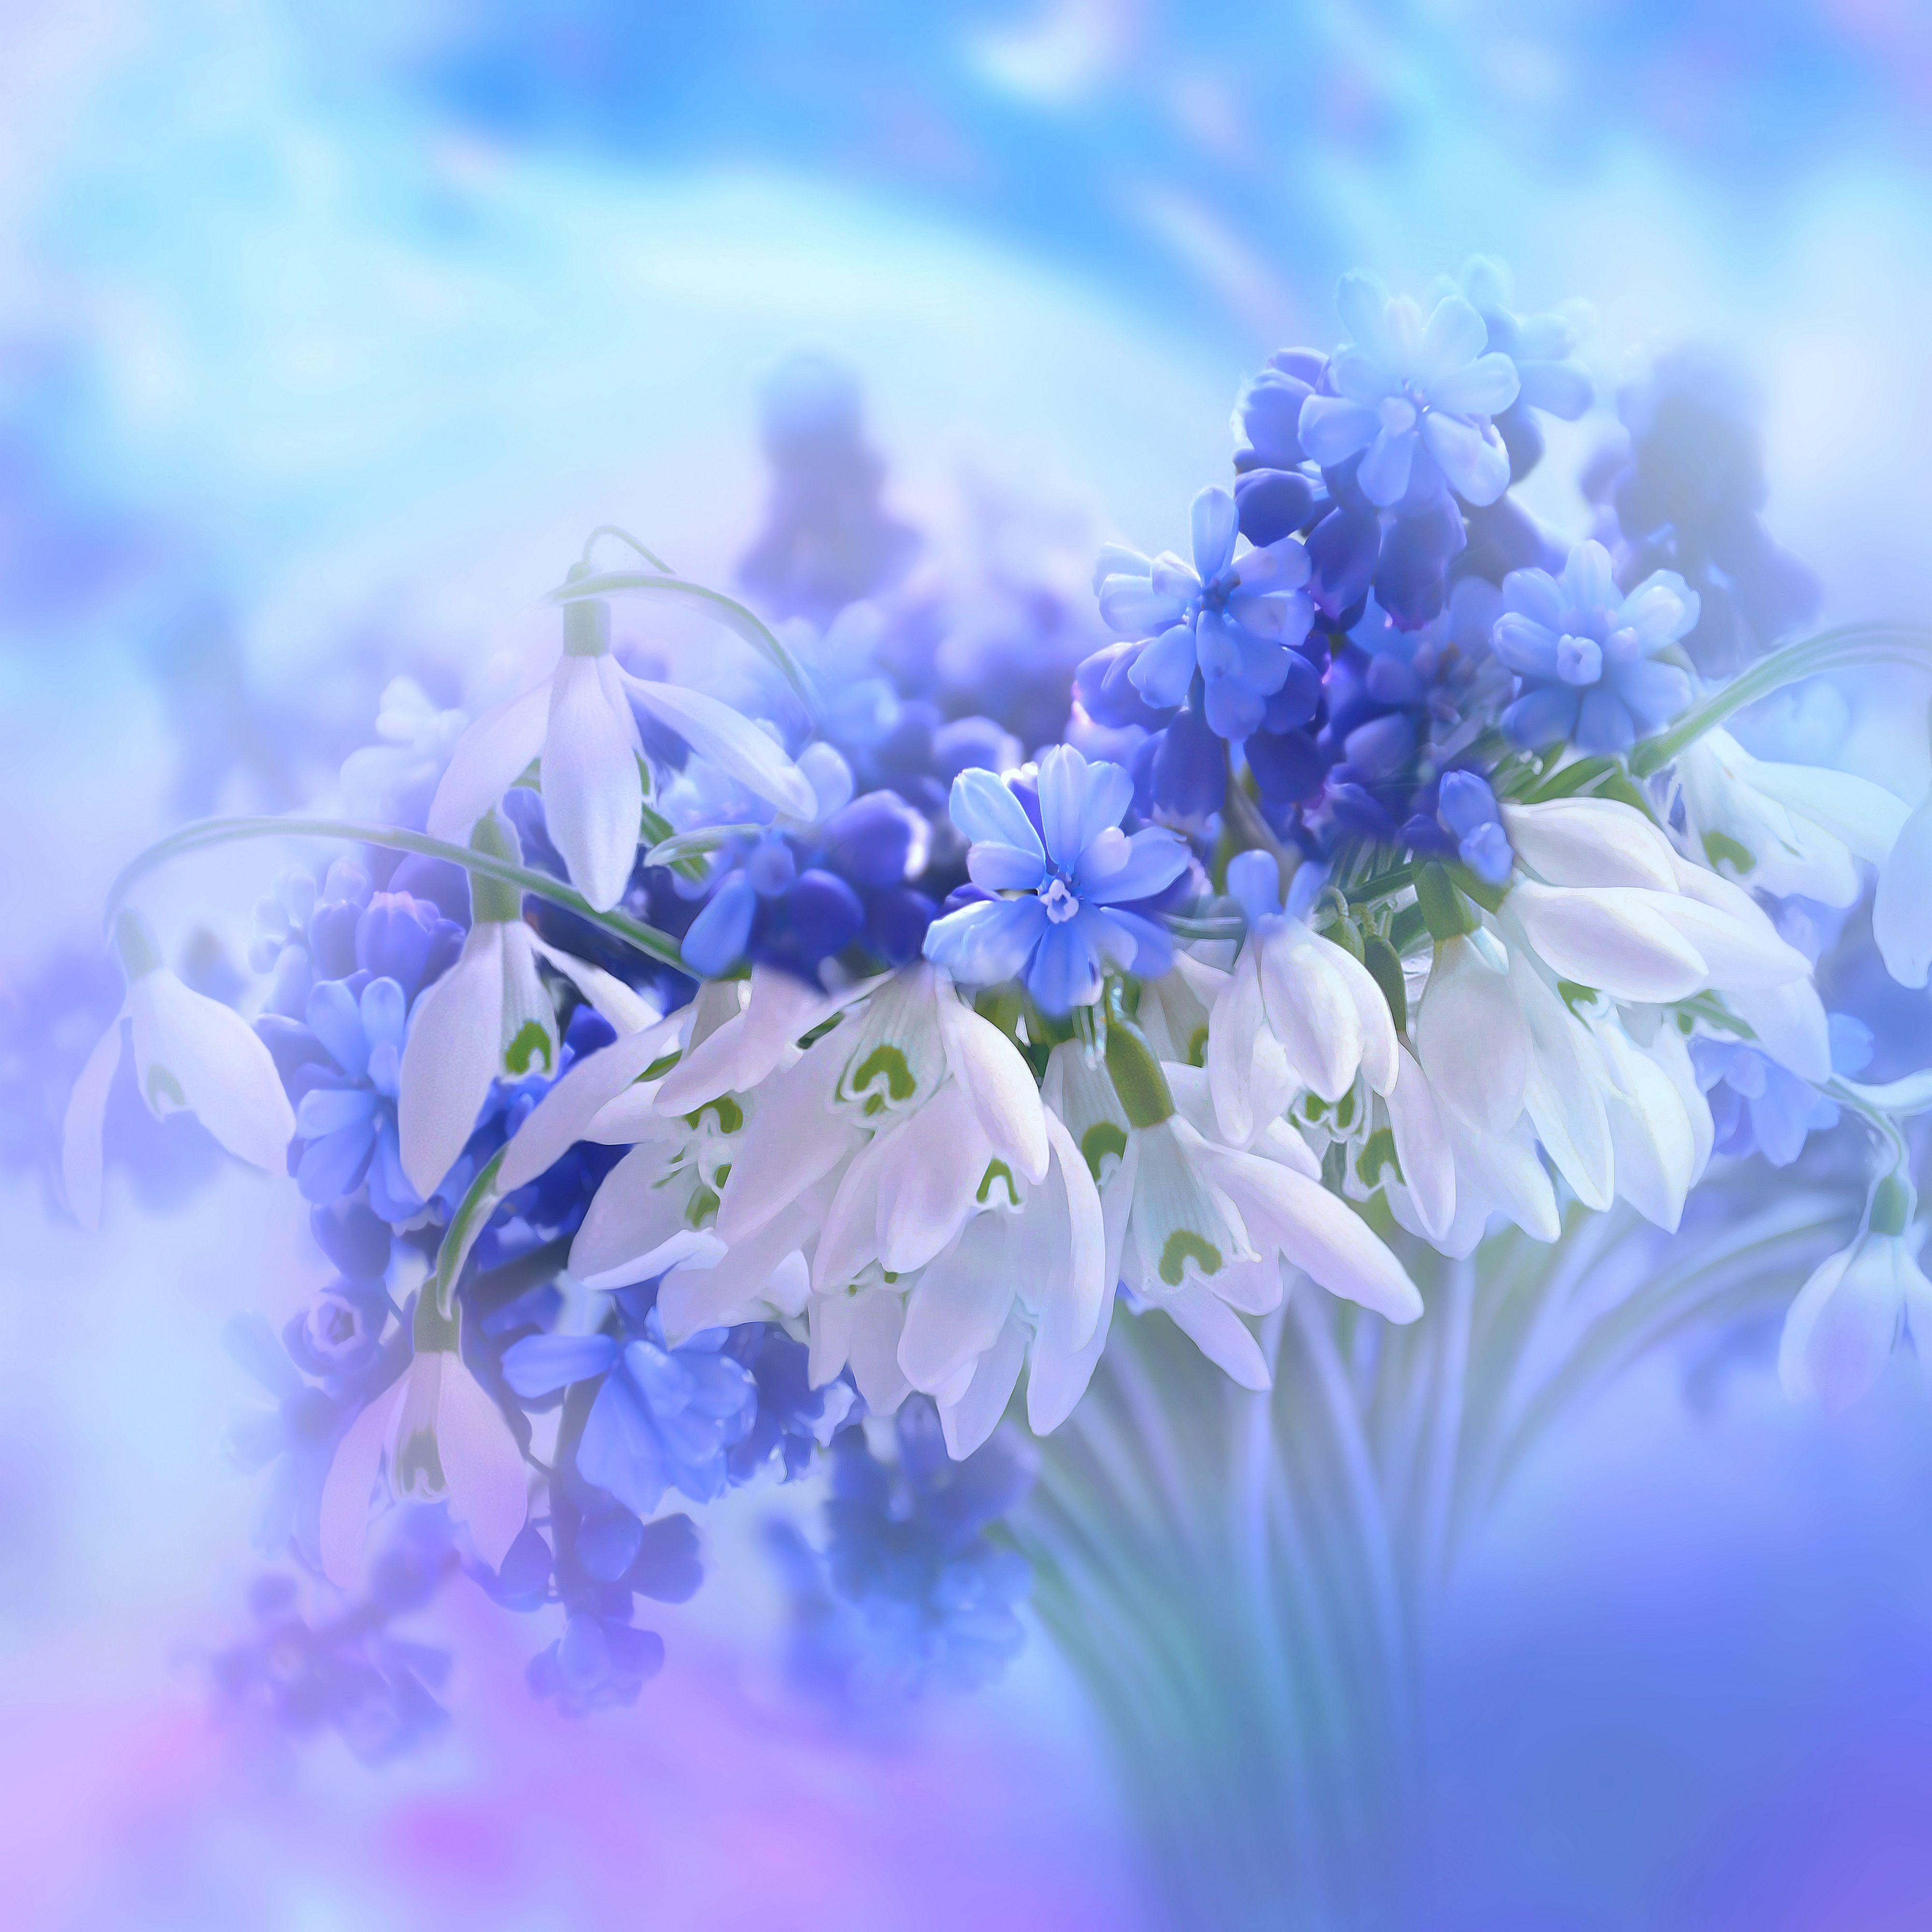 Collection 98+ Images blue and white flower wallpaper Excellent